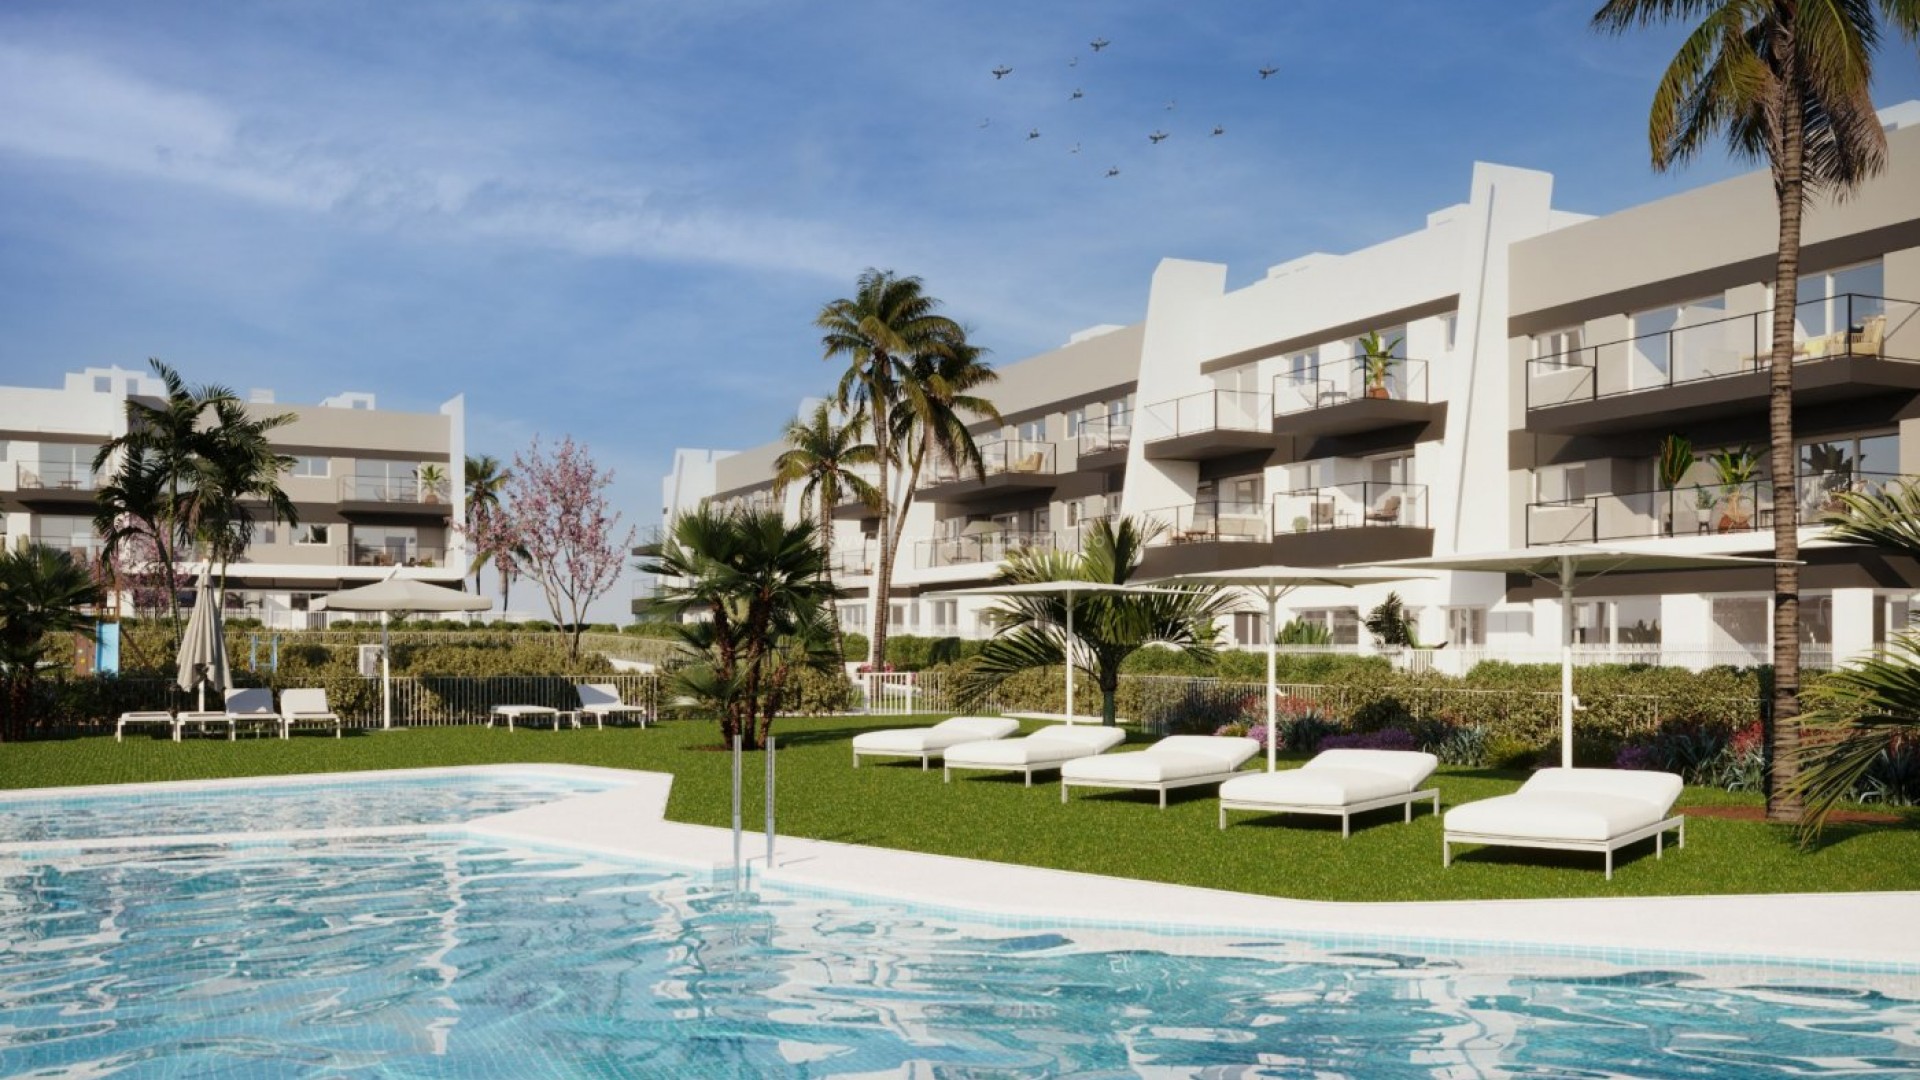 Newly built apartments in Gran Alacant, Santa Pola, 2/3 bedrooms, 2 bathrooms, great communal pool, private garden, sea view or green area